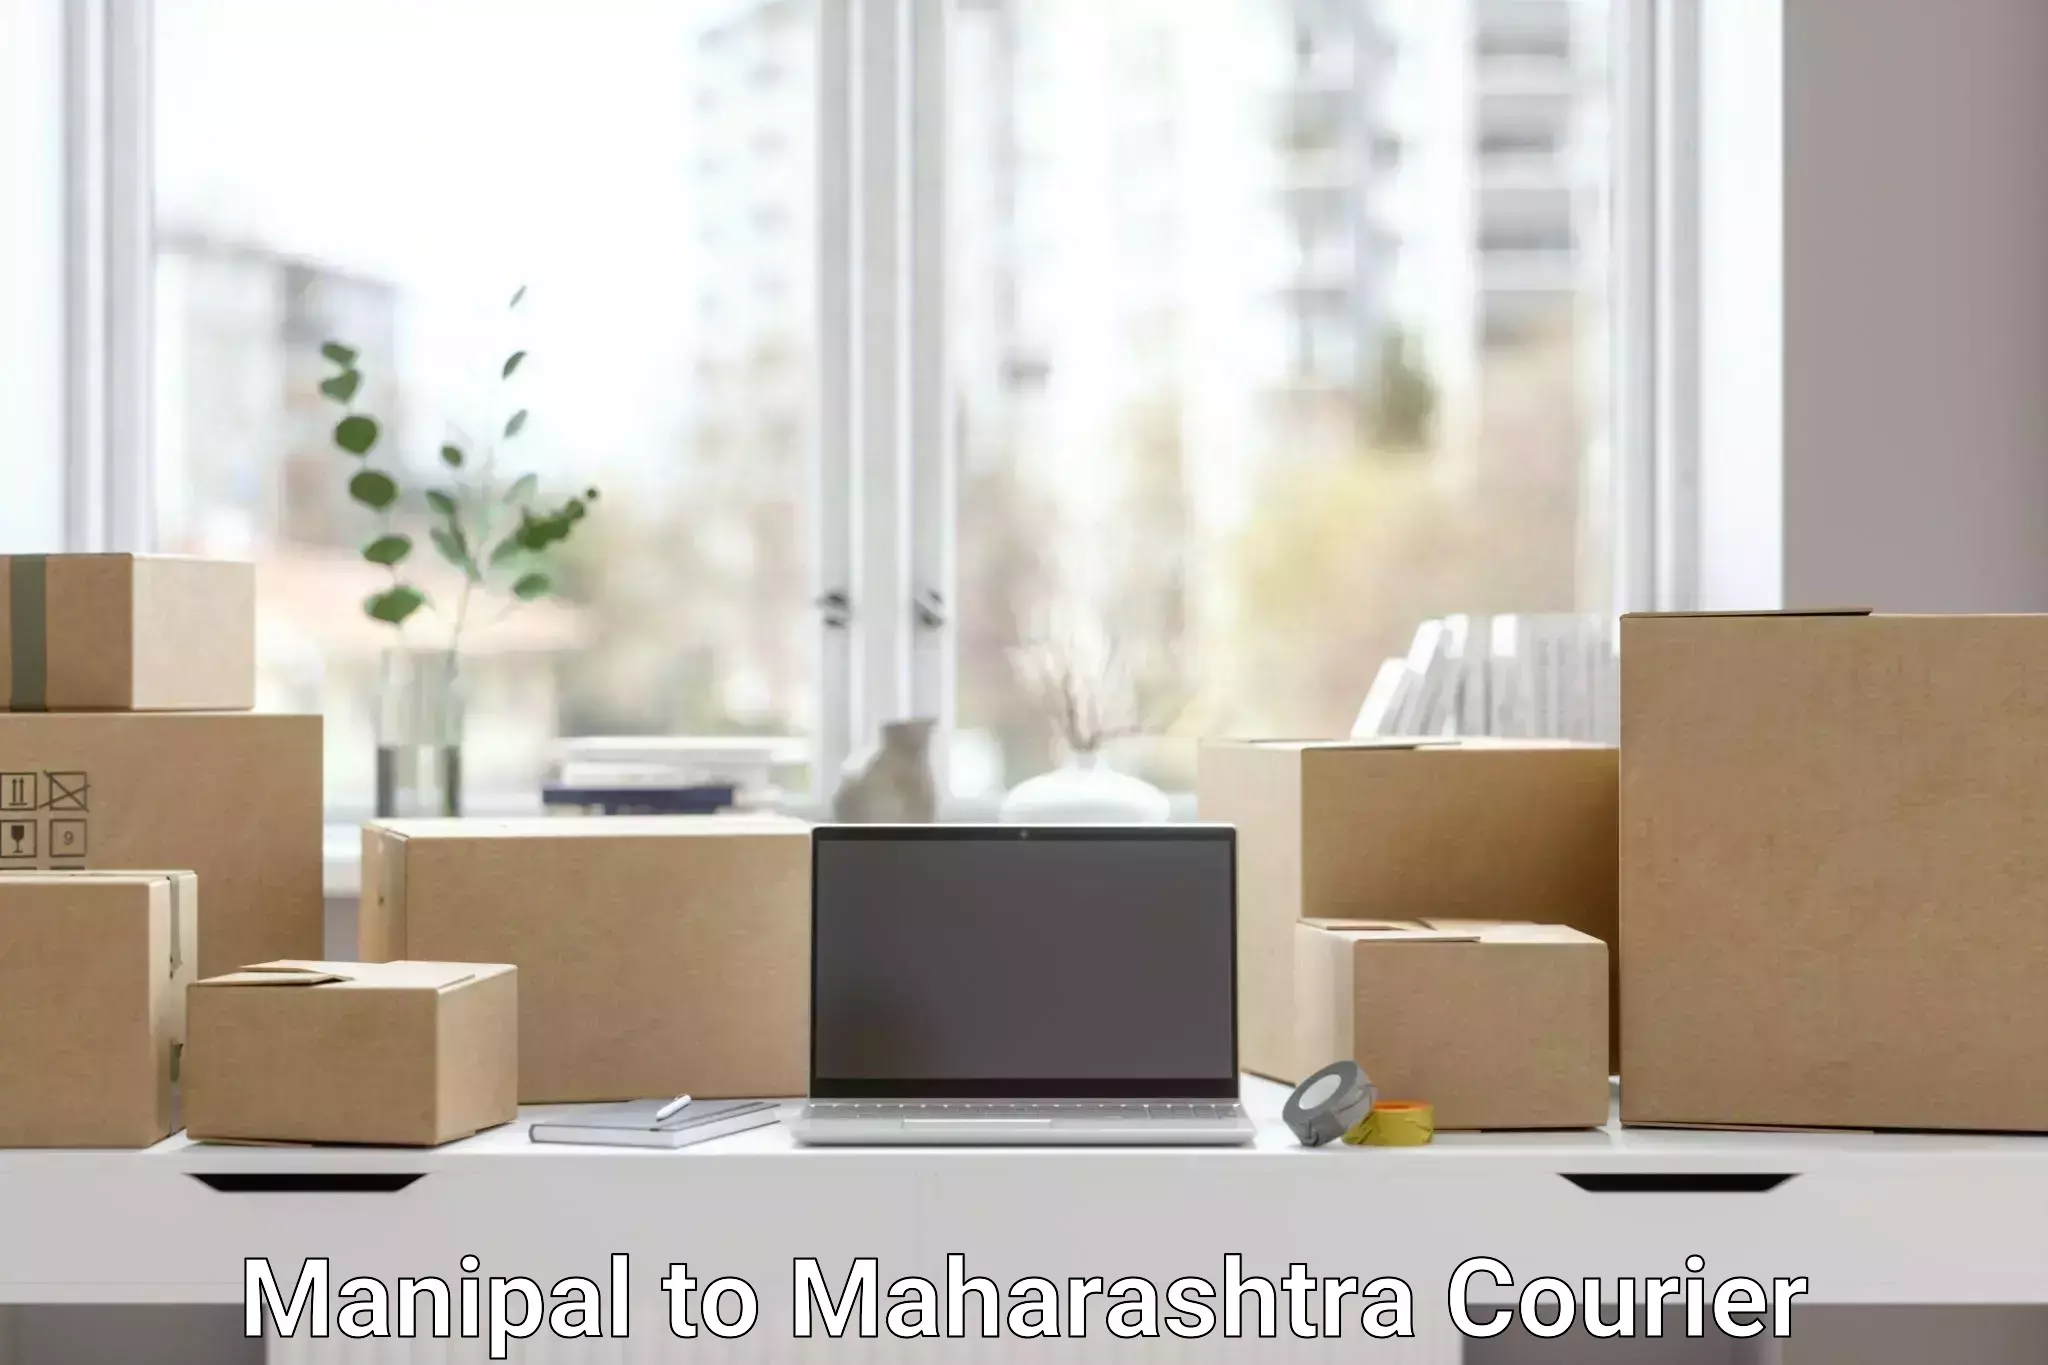 Flexible delivery scheduling Manipal to Kalyan Dombivli